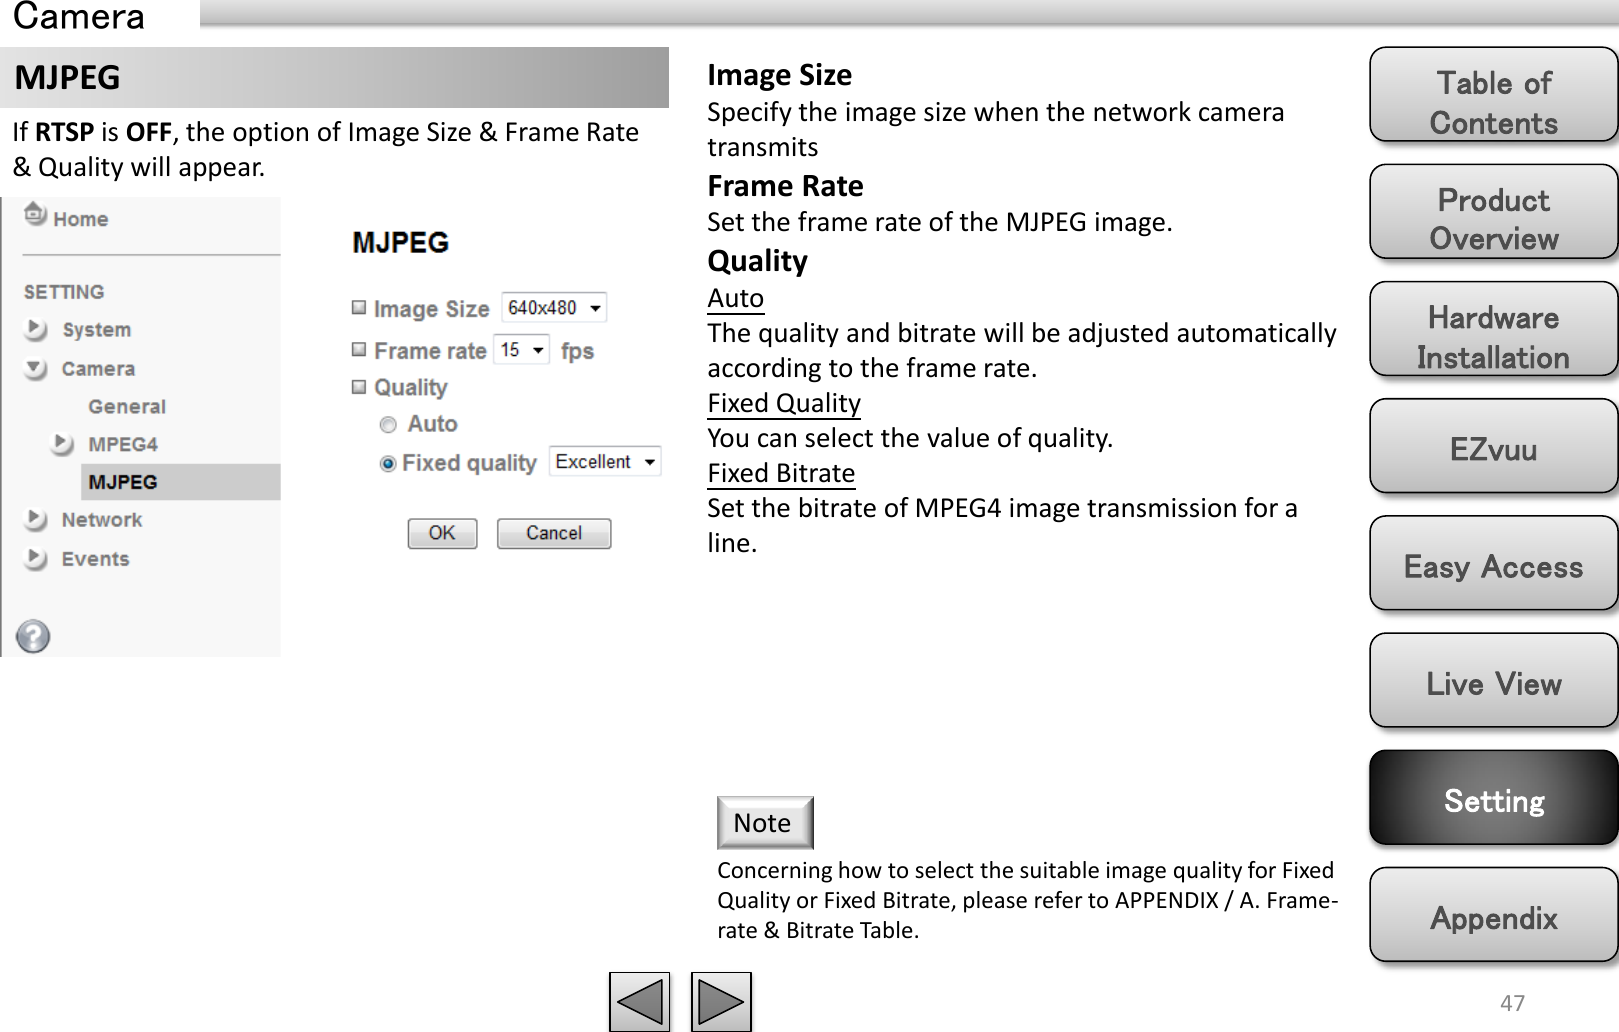 Product Overview Hardware Installation Easy Access EZvuu Setting Live View Appendix Table of Contents 47 MJPEG If RTSP is OFF, the option of Image Size &amp; Frame Rate &amp; Quality will appear. Image Size Specify the image size when the network camera transmits Frame Rate Set the frame rate of the MJPEG image. Quality Auto  The quality and bitrate will be adjusted automatically according to the frame rate. Fixed Quality You can select the value of quality. Fixed Bitrate Set the bitrate of MPEG4 image transmission for a line. Concerning how to select the suitable image quality for Fixed Quality or Fixed Bitrate, please refer to APPENDIX / A. Frame-rate &amp; Bitrate Table.  Note Camera 